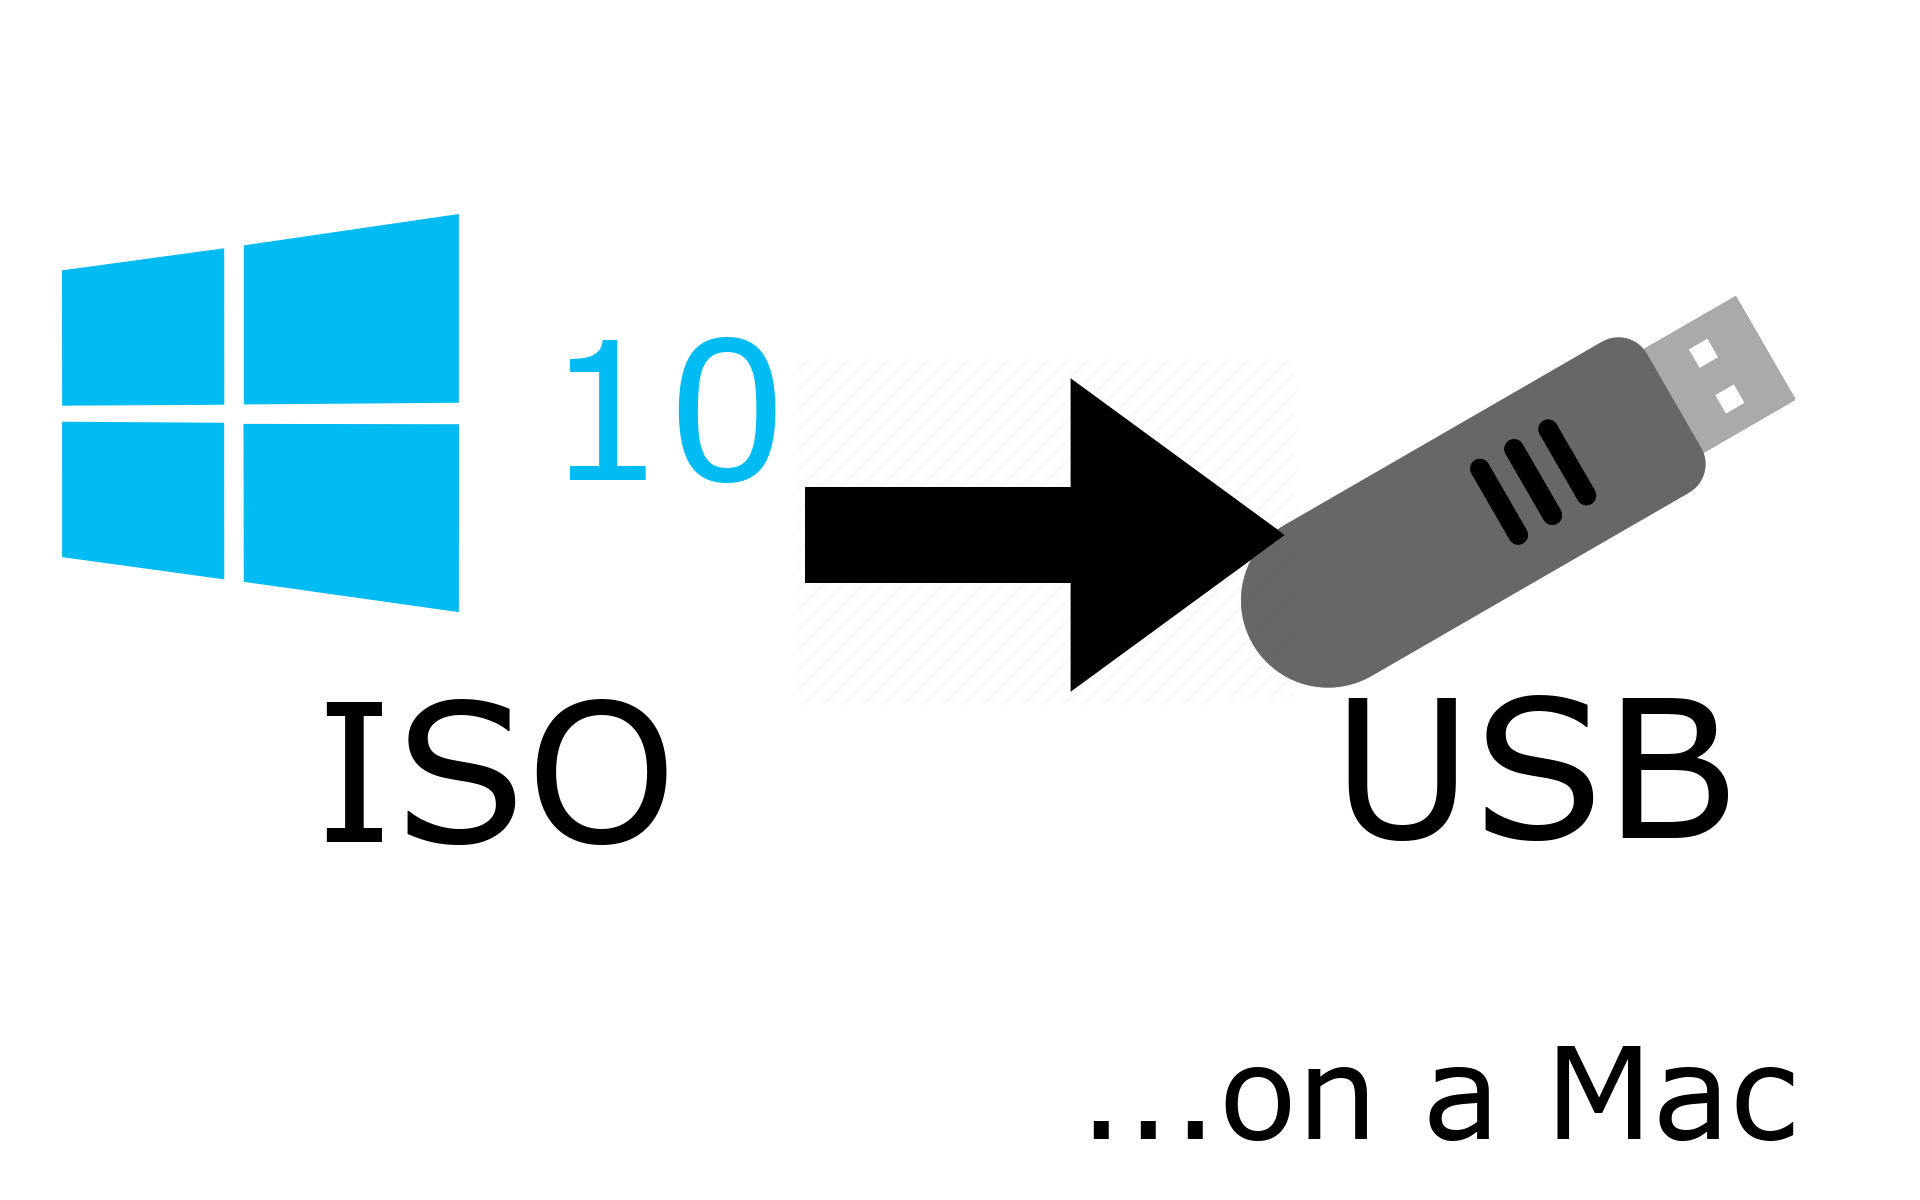 create bootable usb drive for windows 10 on mac from terminal